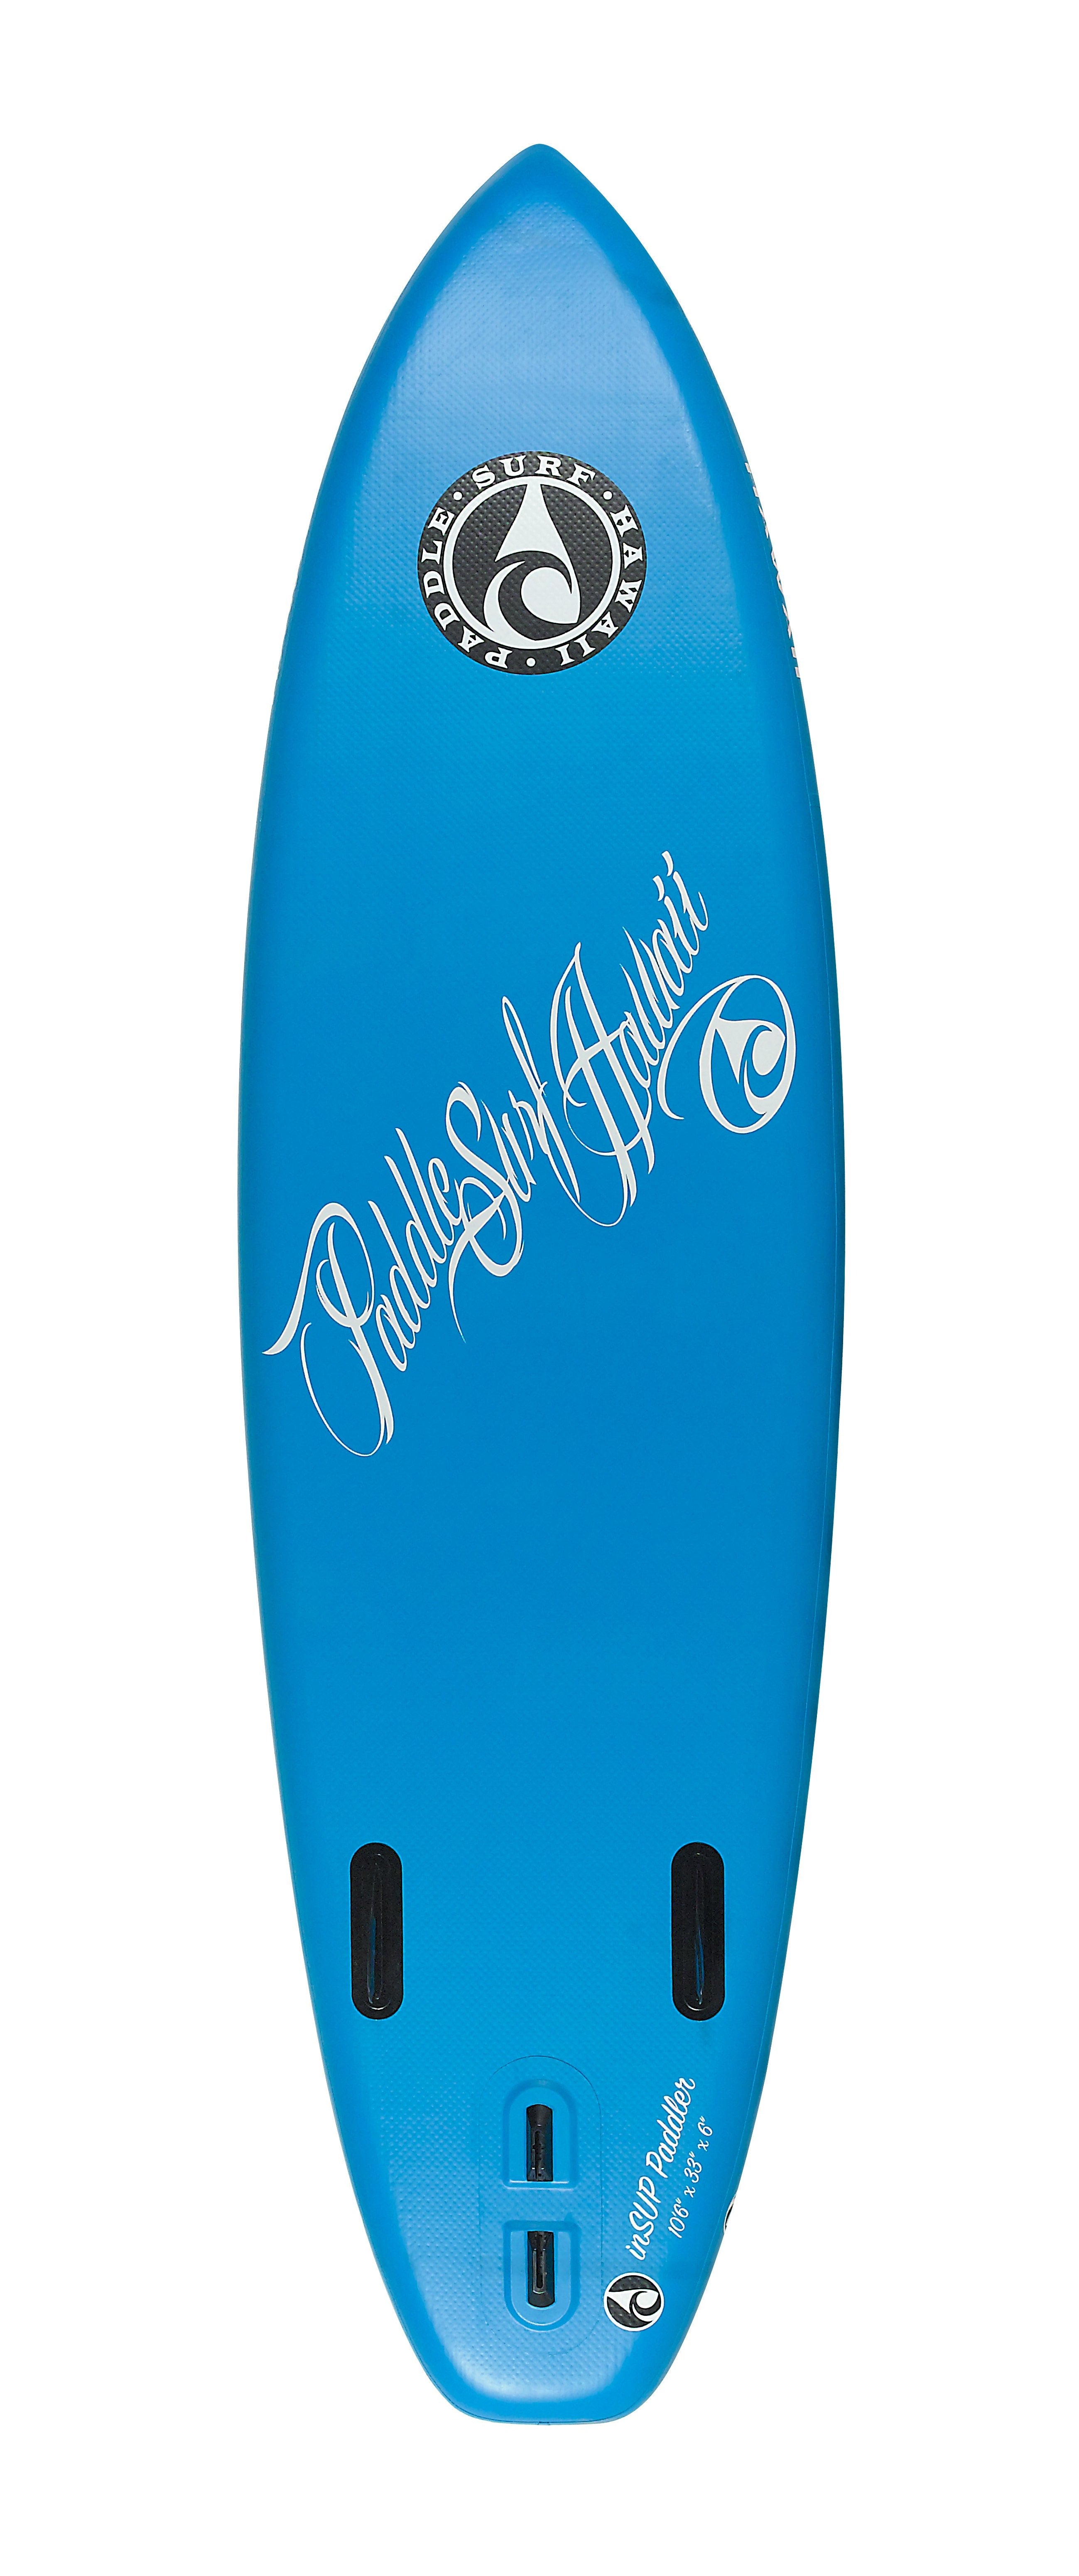 Picture shows the bottom of the inSUP Paddler inflatable Stand up Paddle Board